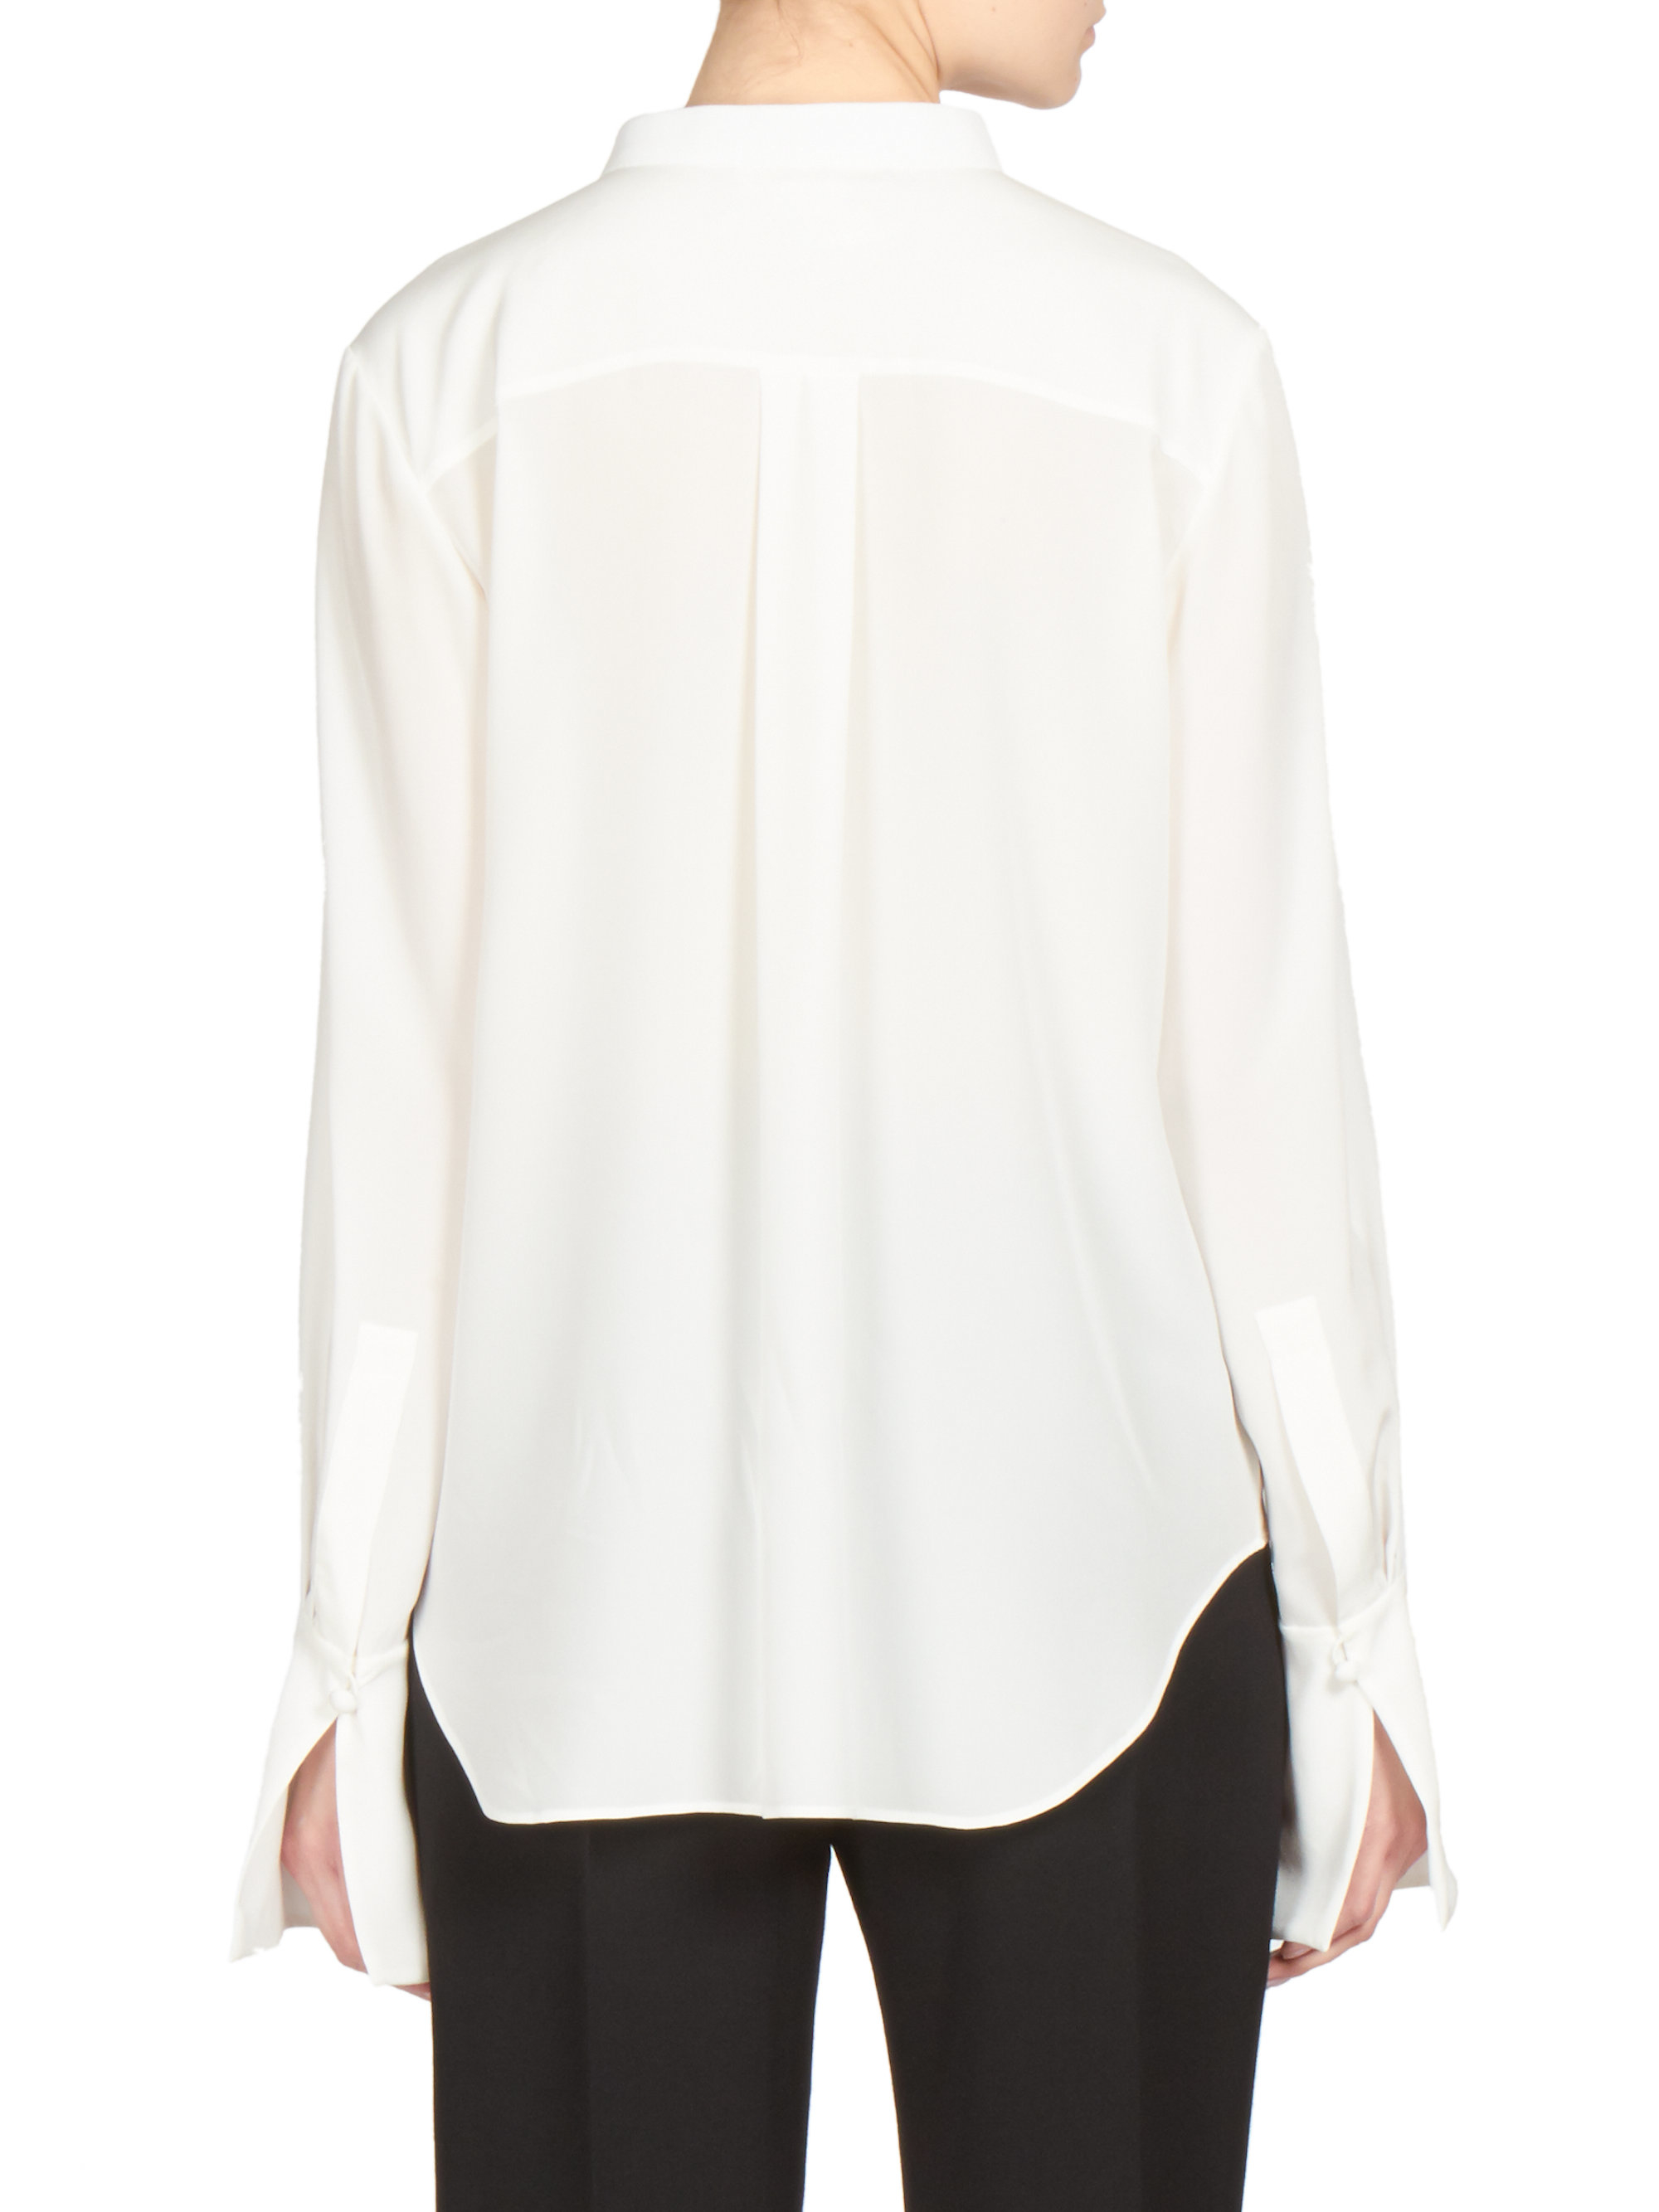 Chloé Silk & Lace Blouse in White - Lyst